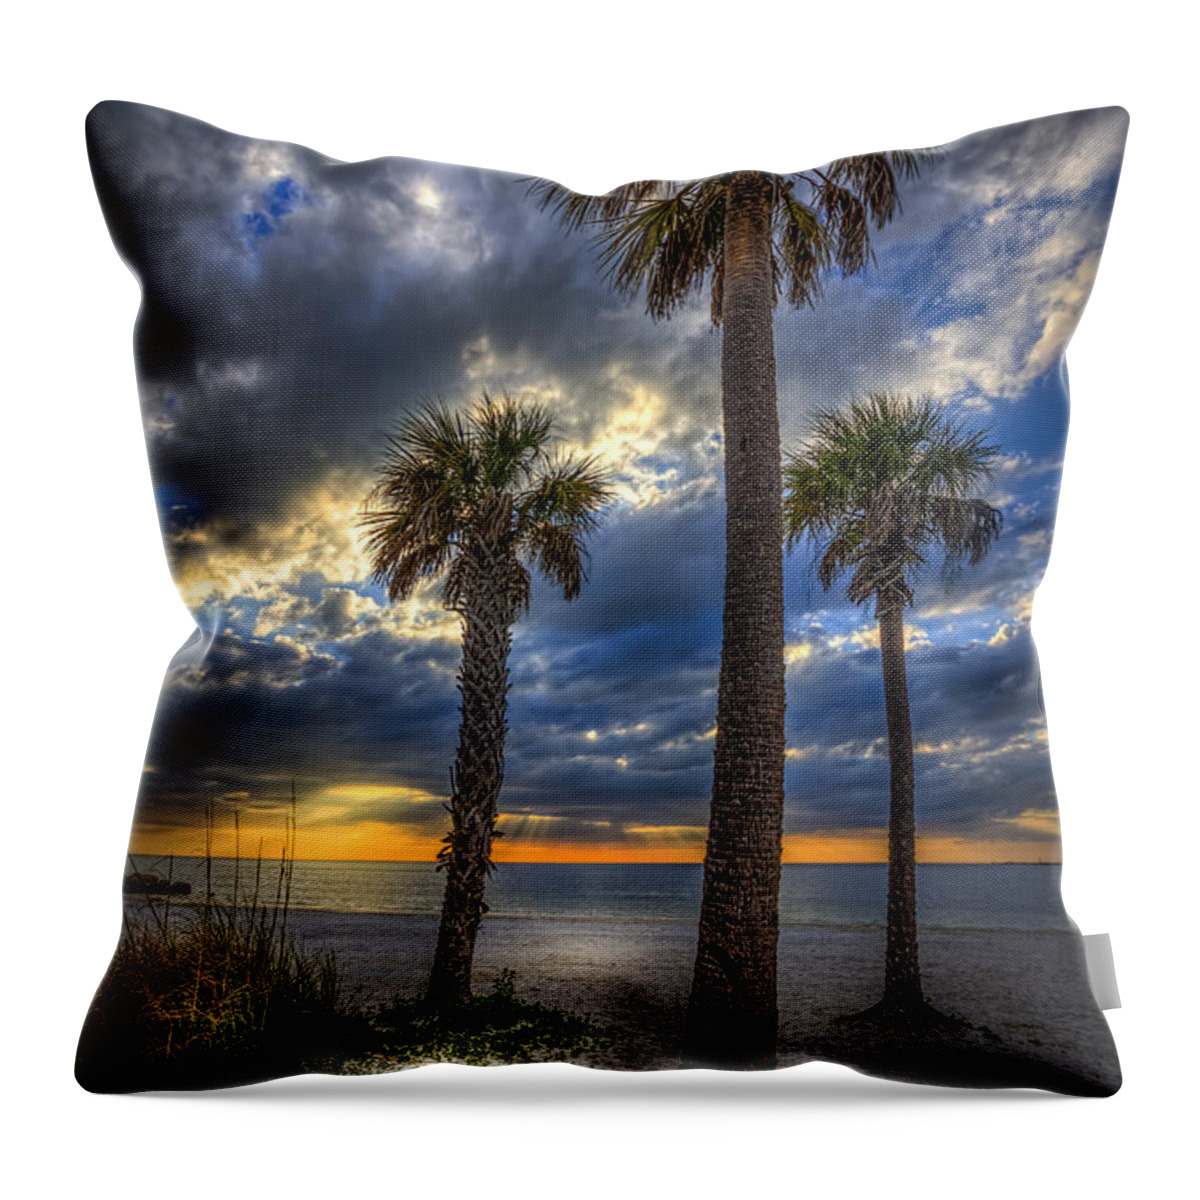 Clouds Throw Pillow featuring the photograph Three Palm Stew by Marvin Spates